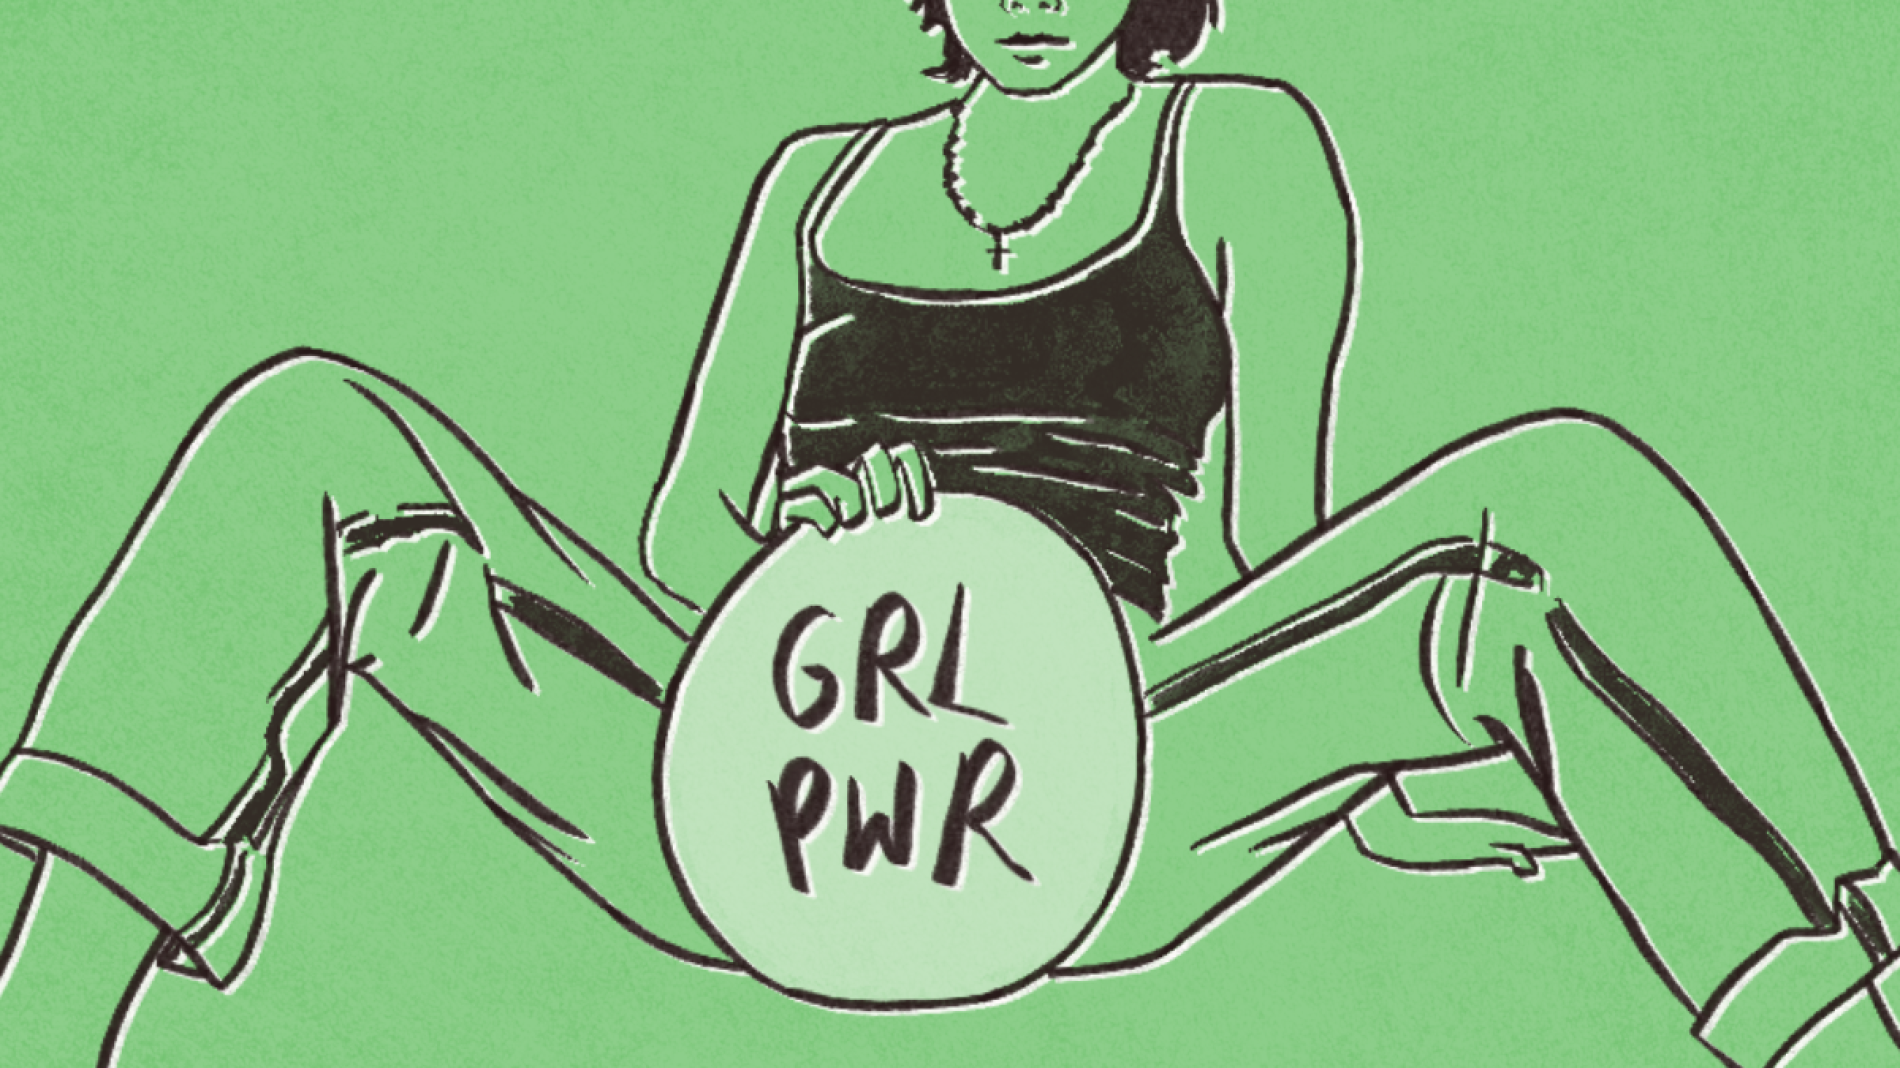 an illustration of a femine figure, cut off at the neck, they are holding a mirror with the words 'GRL PWR' written on it